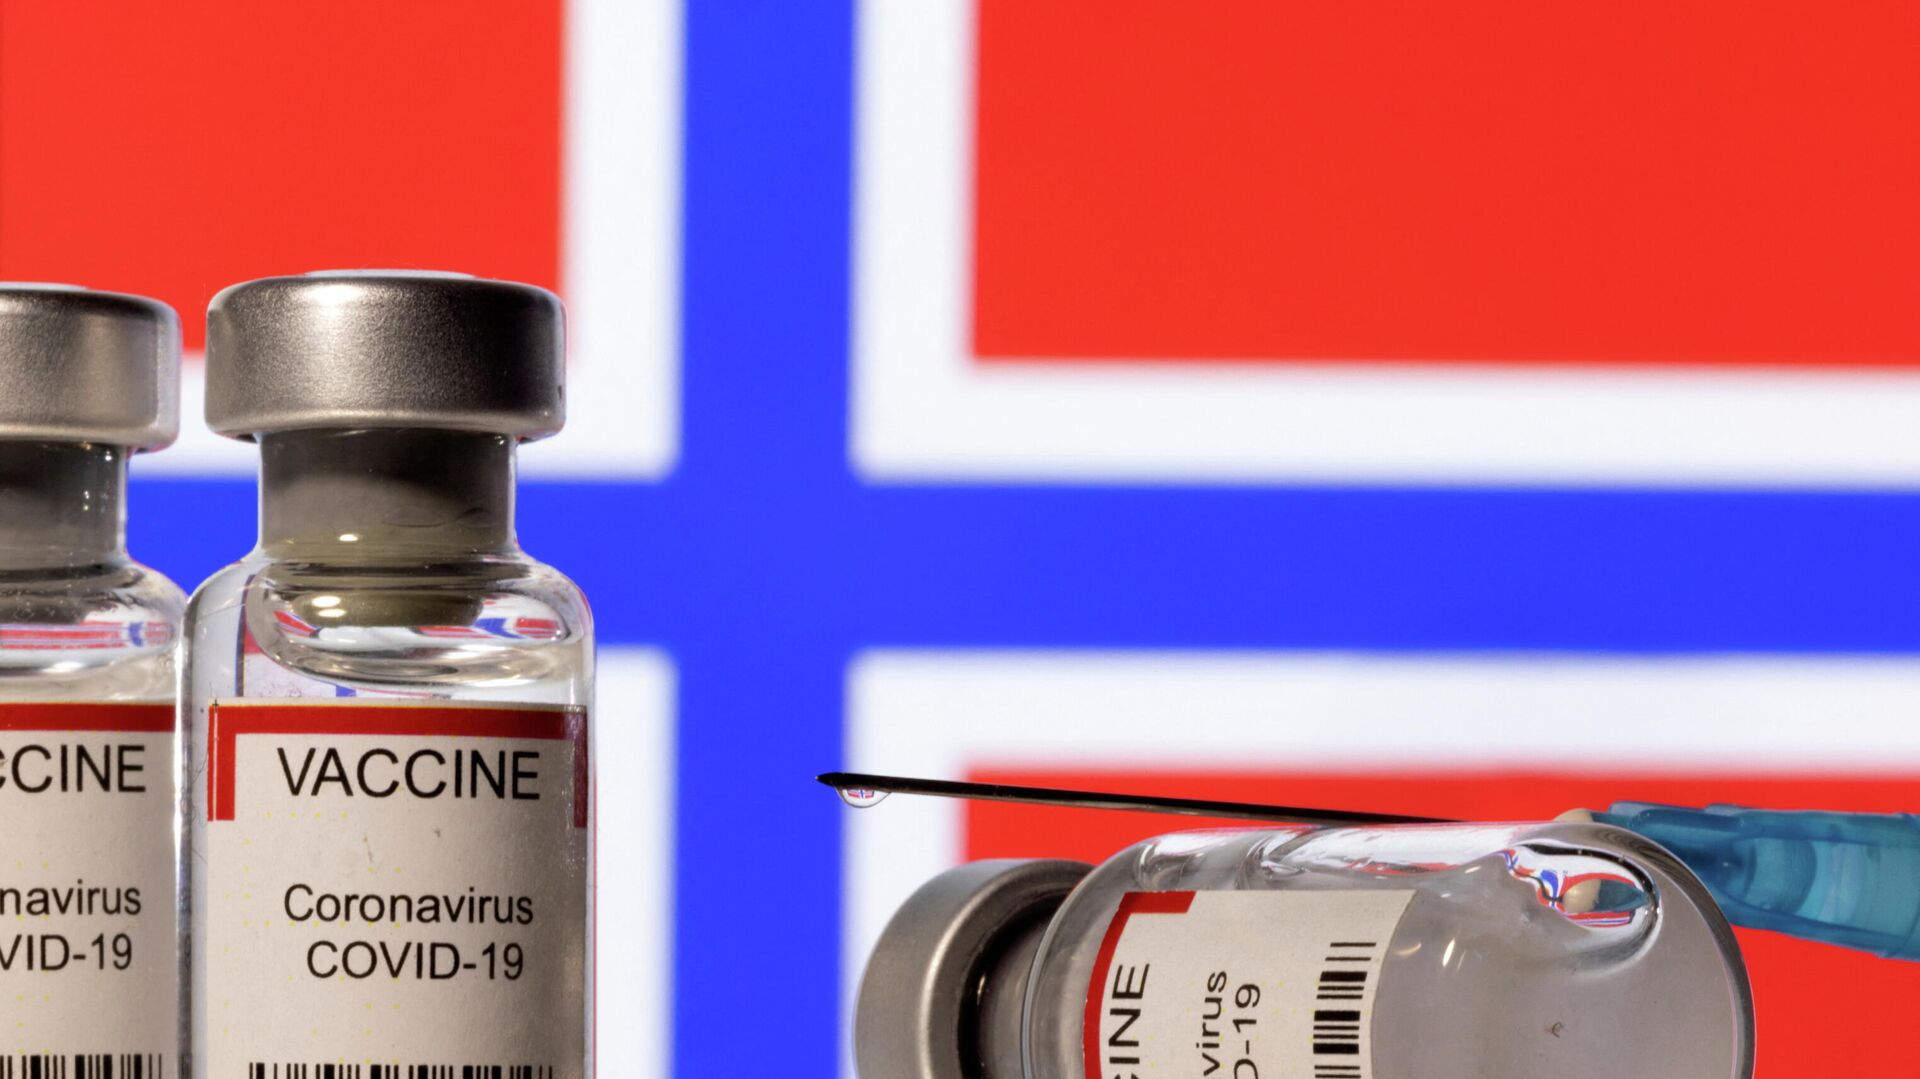 Vials labelled VACCINE Coronavirus COVID-19 and a syringe are seen in front of a displayed flag of Norway in this illustration taken December 11, 2021. - Sputnik International, 1920, 07.01.2022